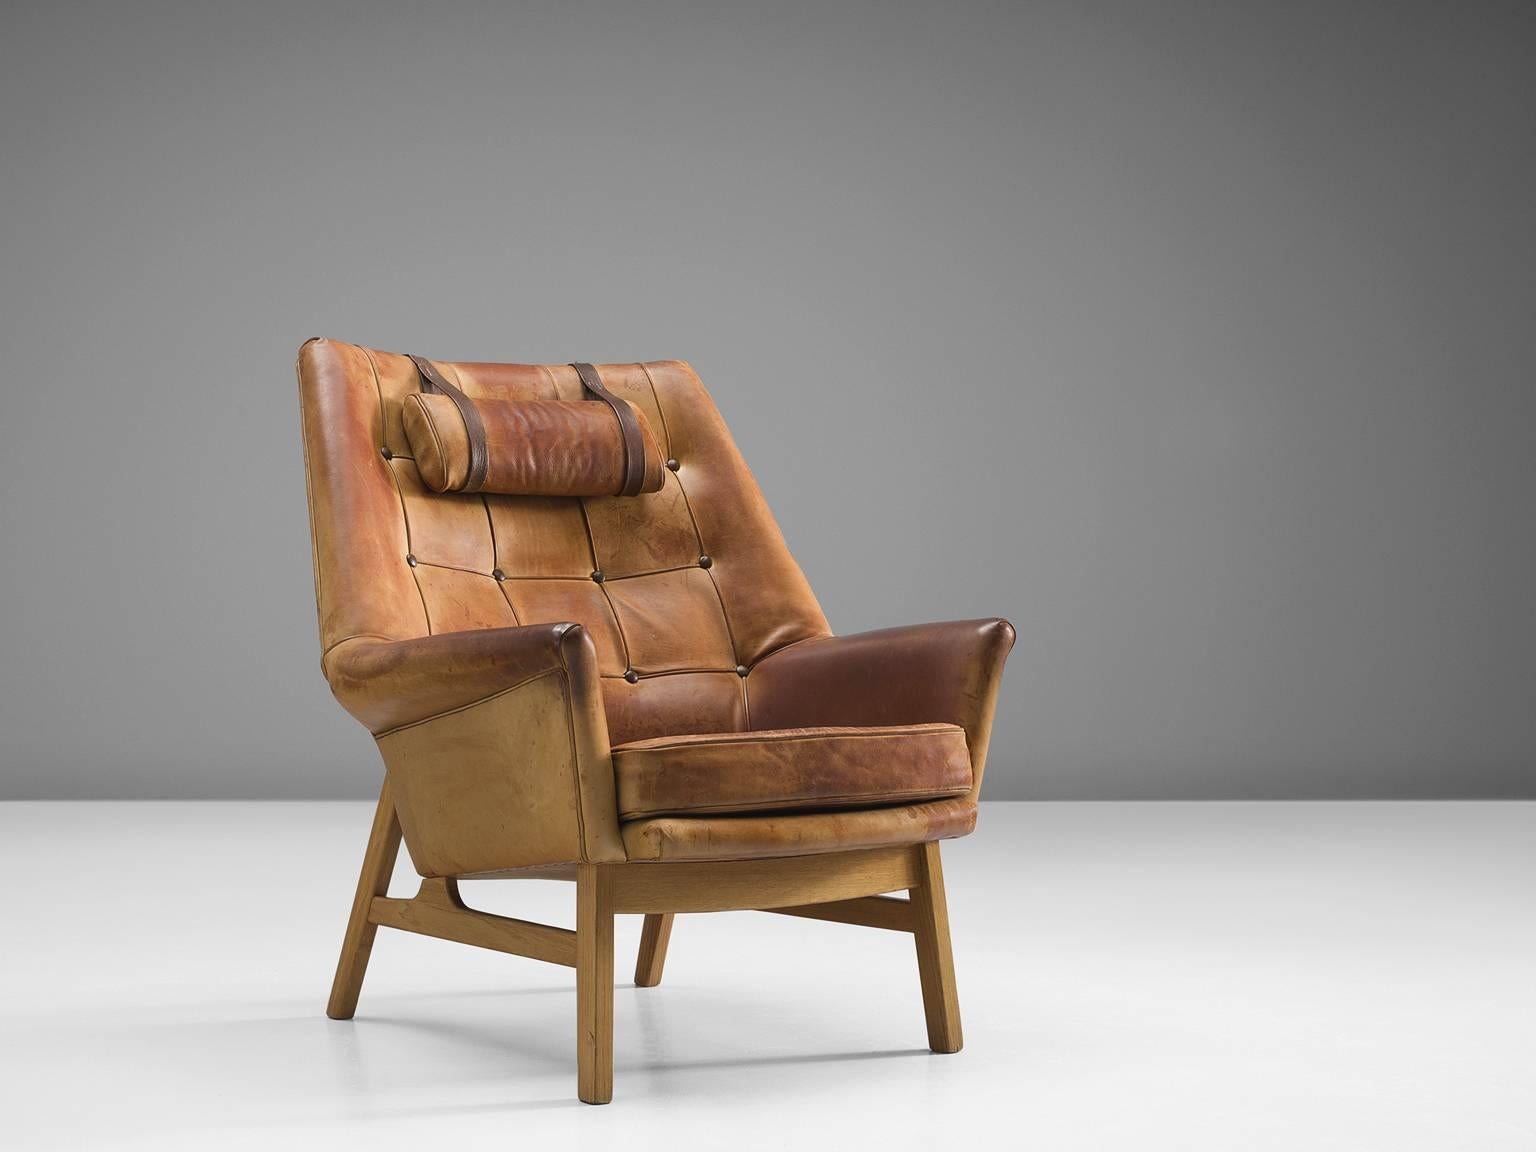 Easy chair model Glimminge, oak and cognac leather, designed by Tove & Edvard Kindt-Larsen for OPE, Sweden, 1950s.

This lounge chair in oak and original cognac brown leather is designed by the designer duo and couple Tove & Edvardt Kindt-Larsen.